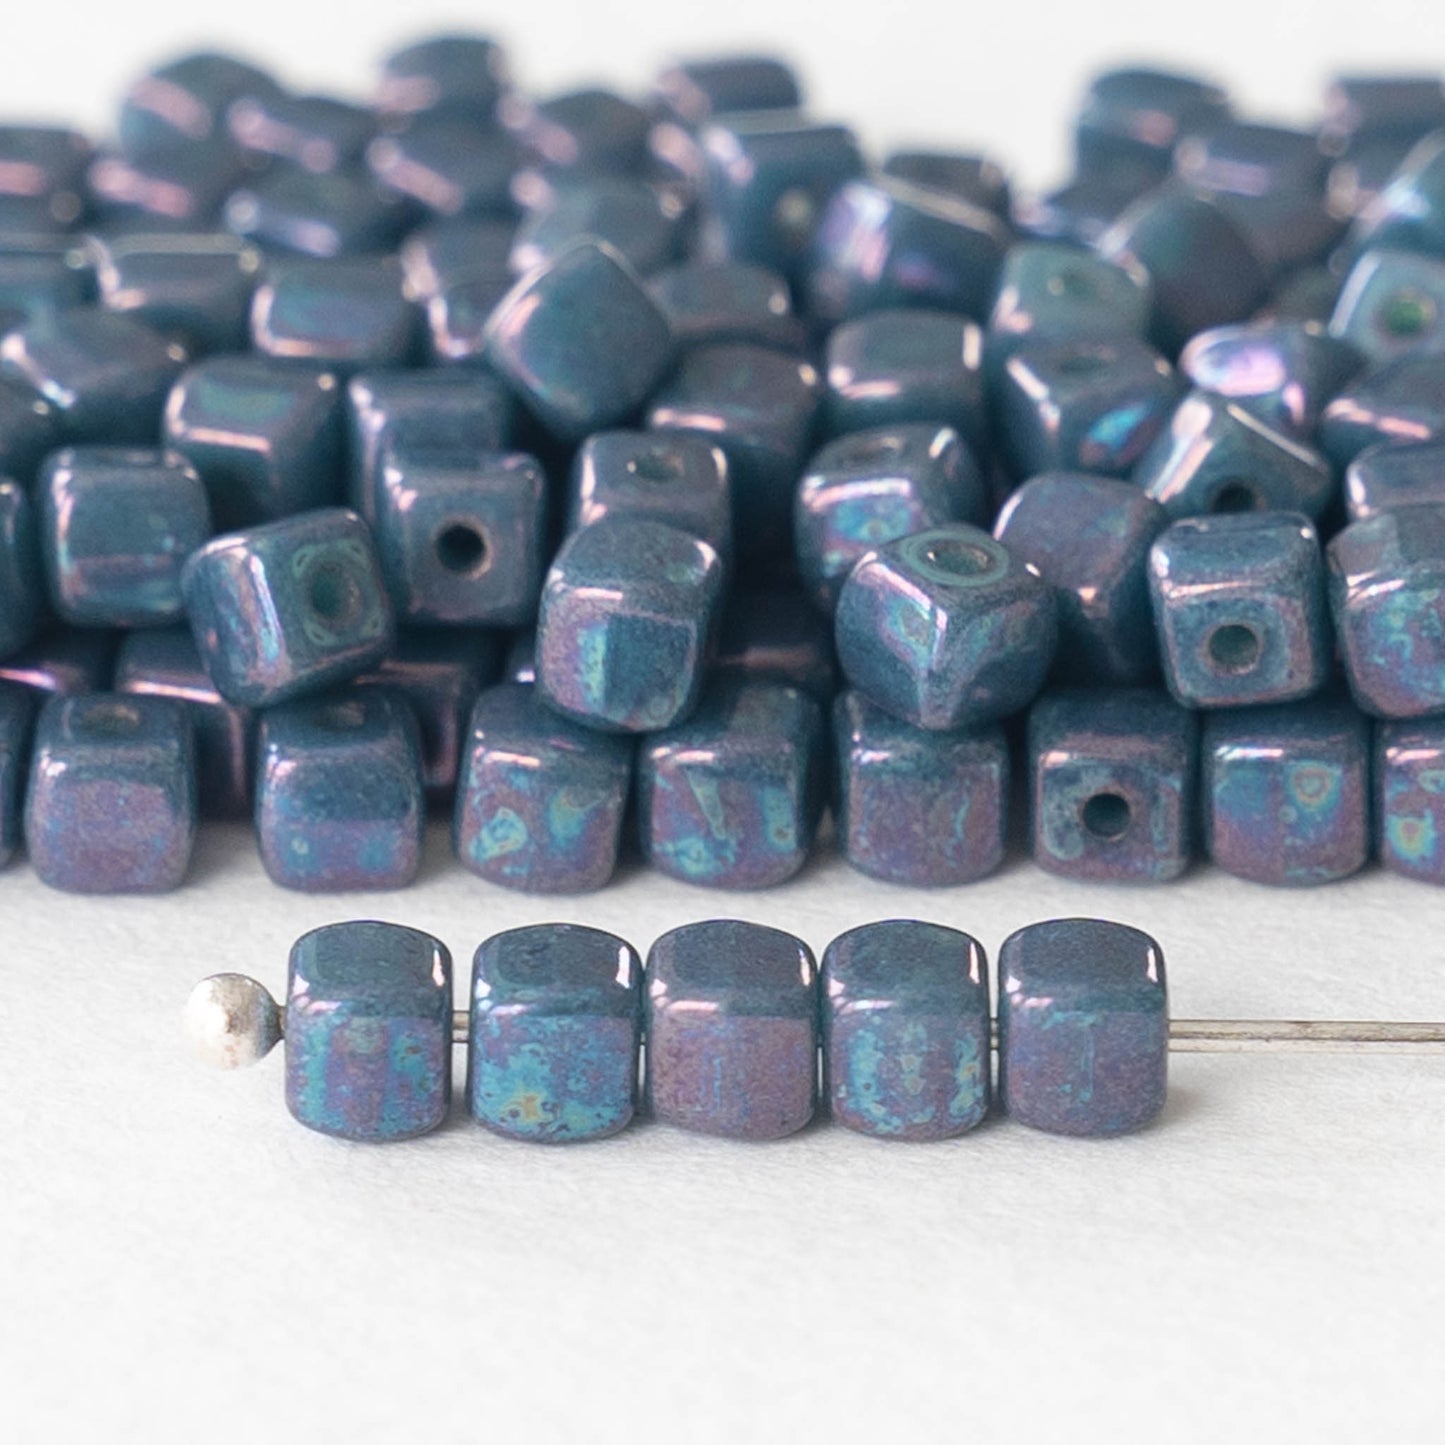 4mm Glass Cube Beads - Opaque Blue Purple Luster - 100 beads